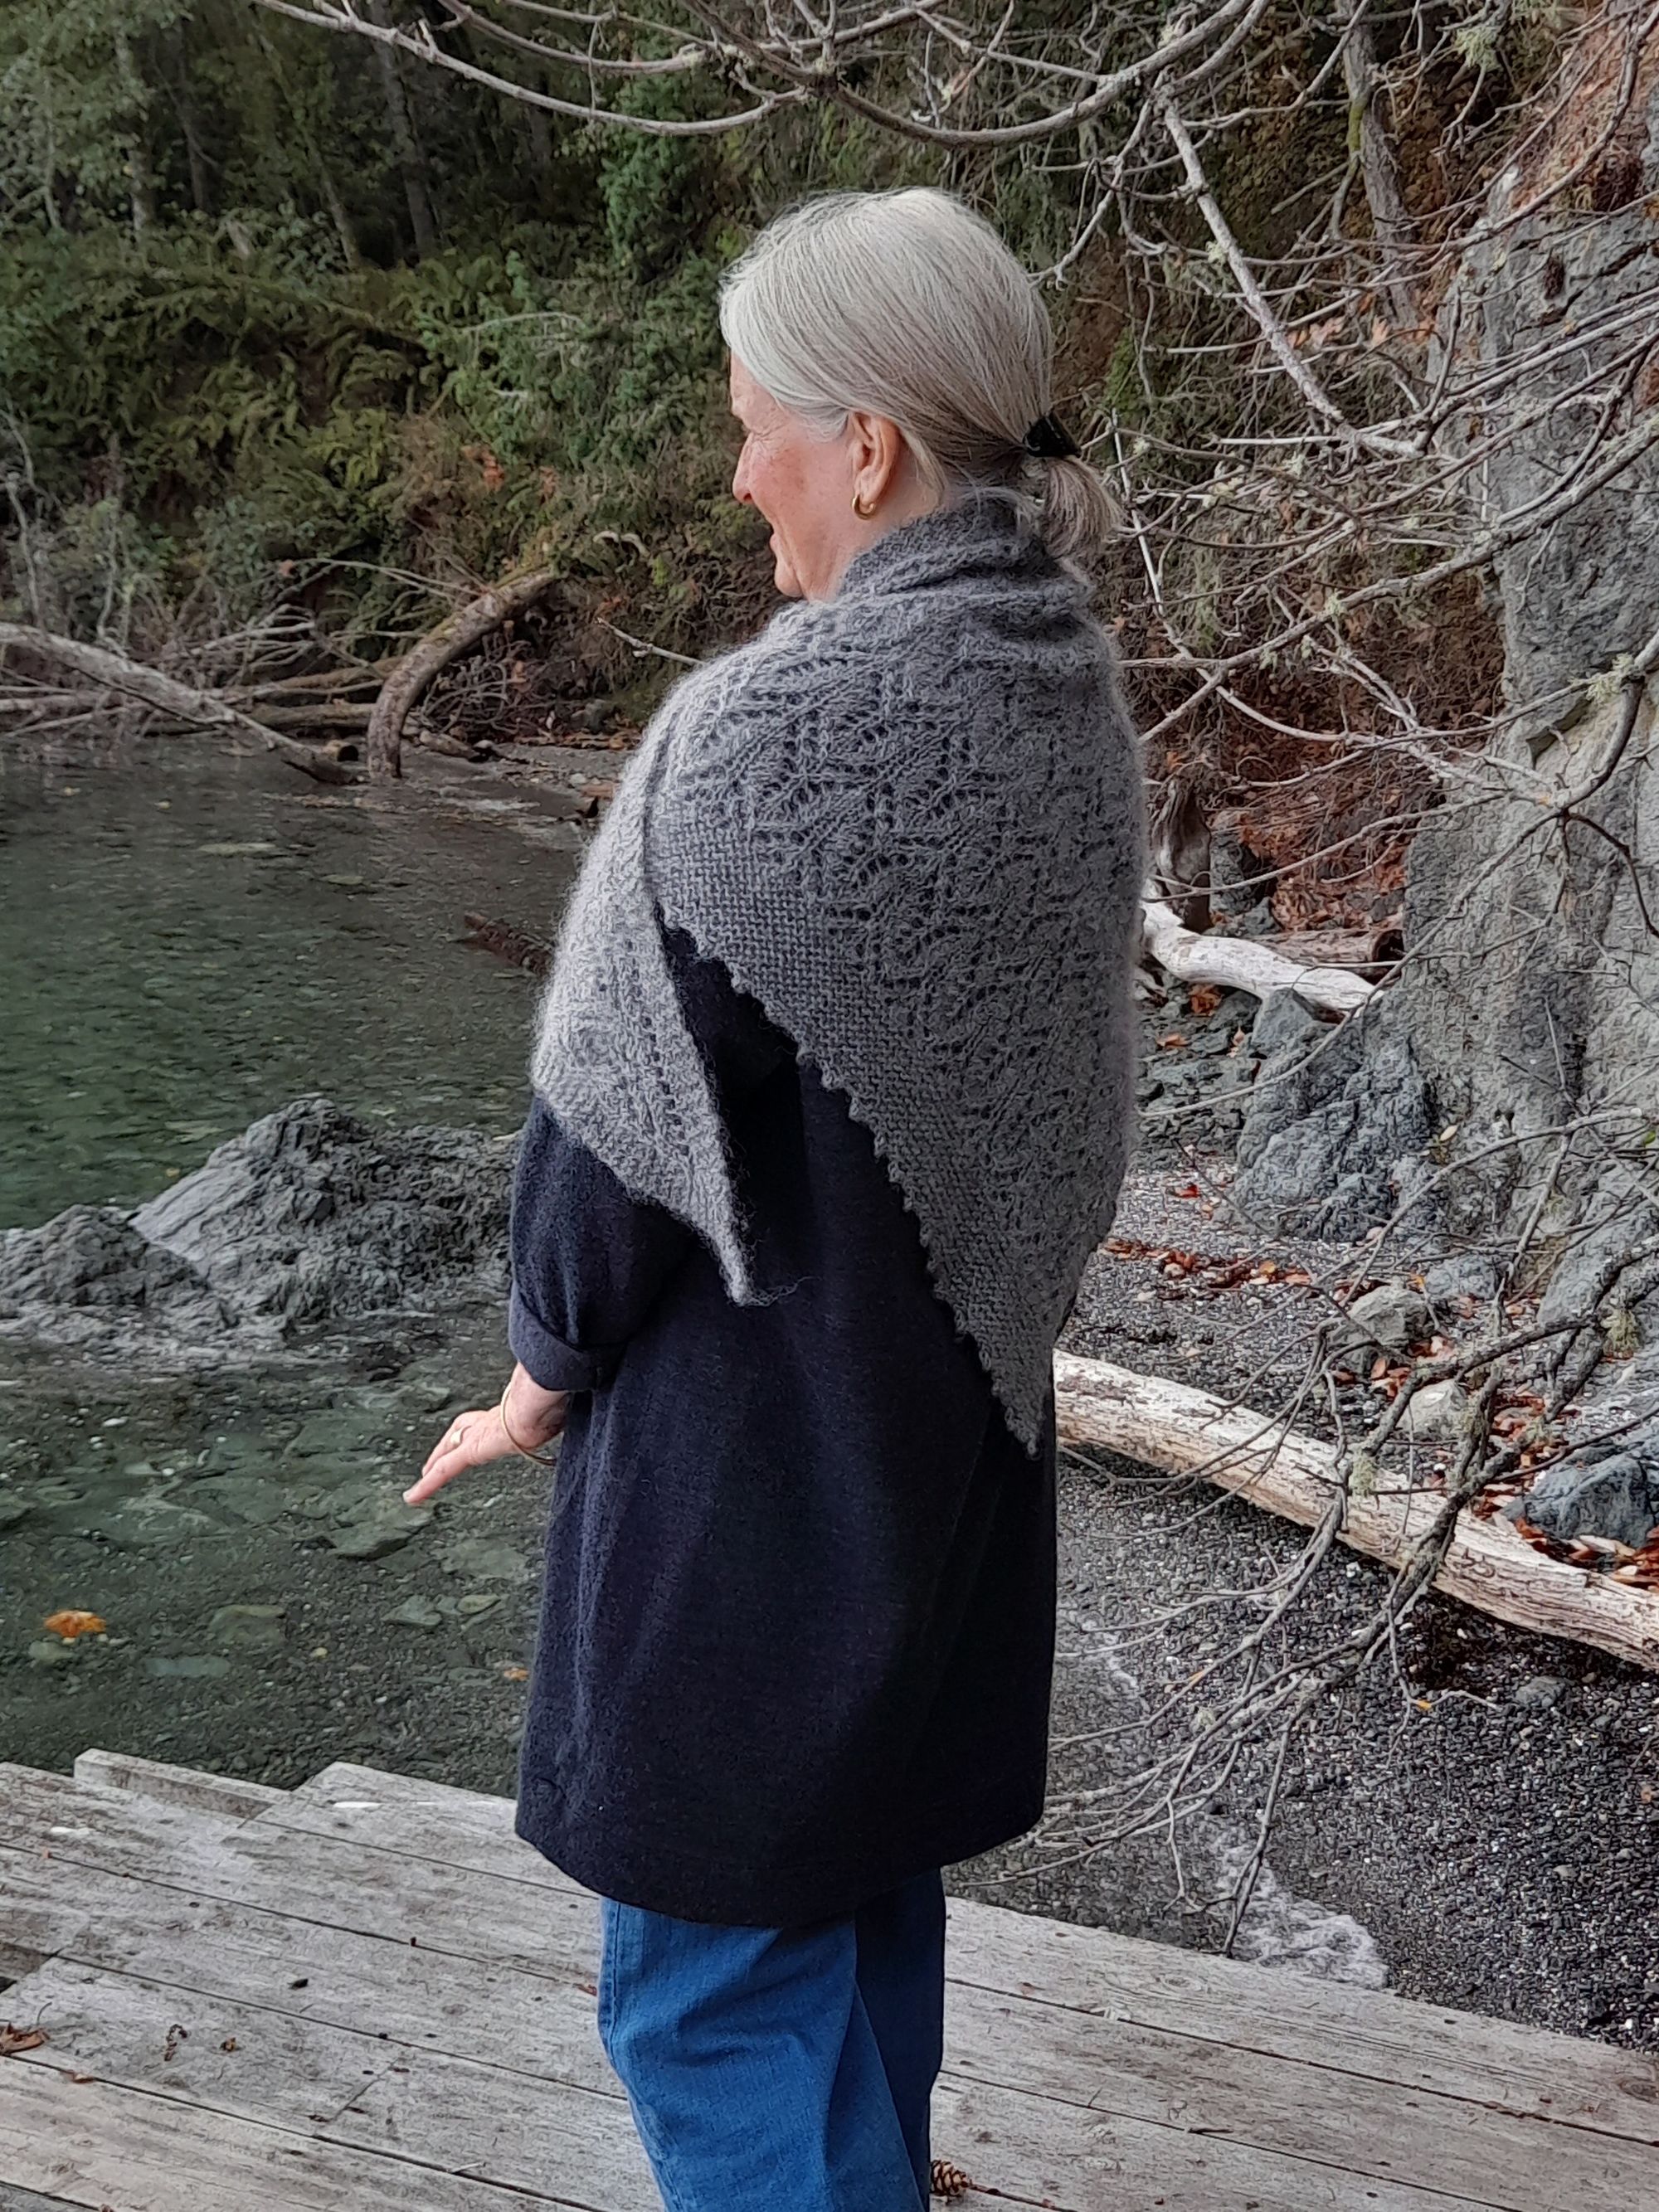 Knitting with Specialty Yarns from the North Beach Farm win recognition at the Salt Spring Fall Fair